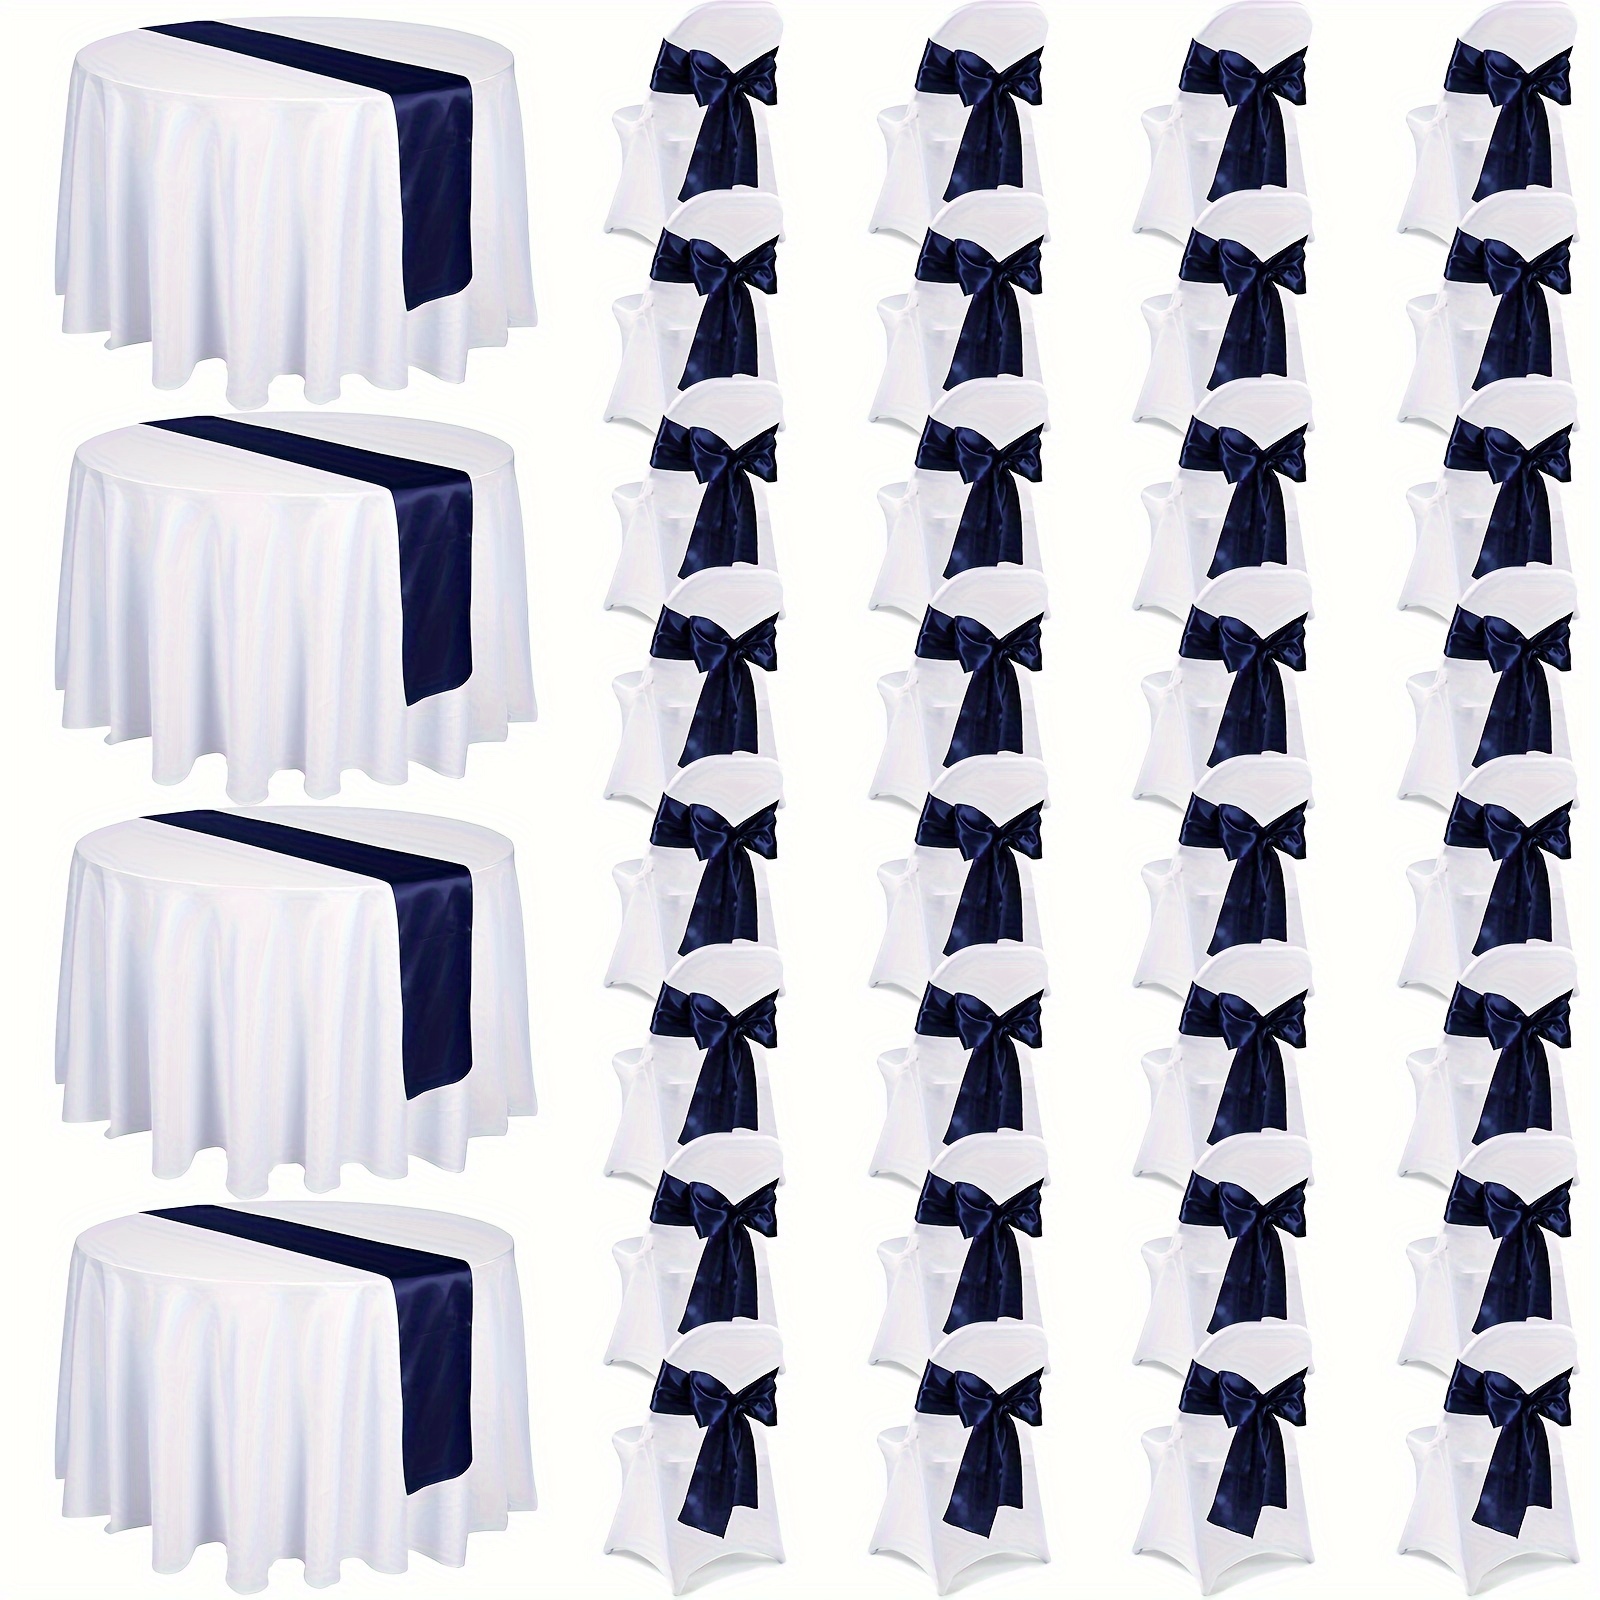 

72pcs Tablecloth Chair Cover Set, Include White Round Tablecloths 120, Satin Chair Sashes Ties, Spandex Folding Chair Covers, Table Runner For Wedding Banquet Parties (dark Blue)